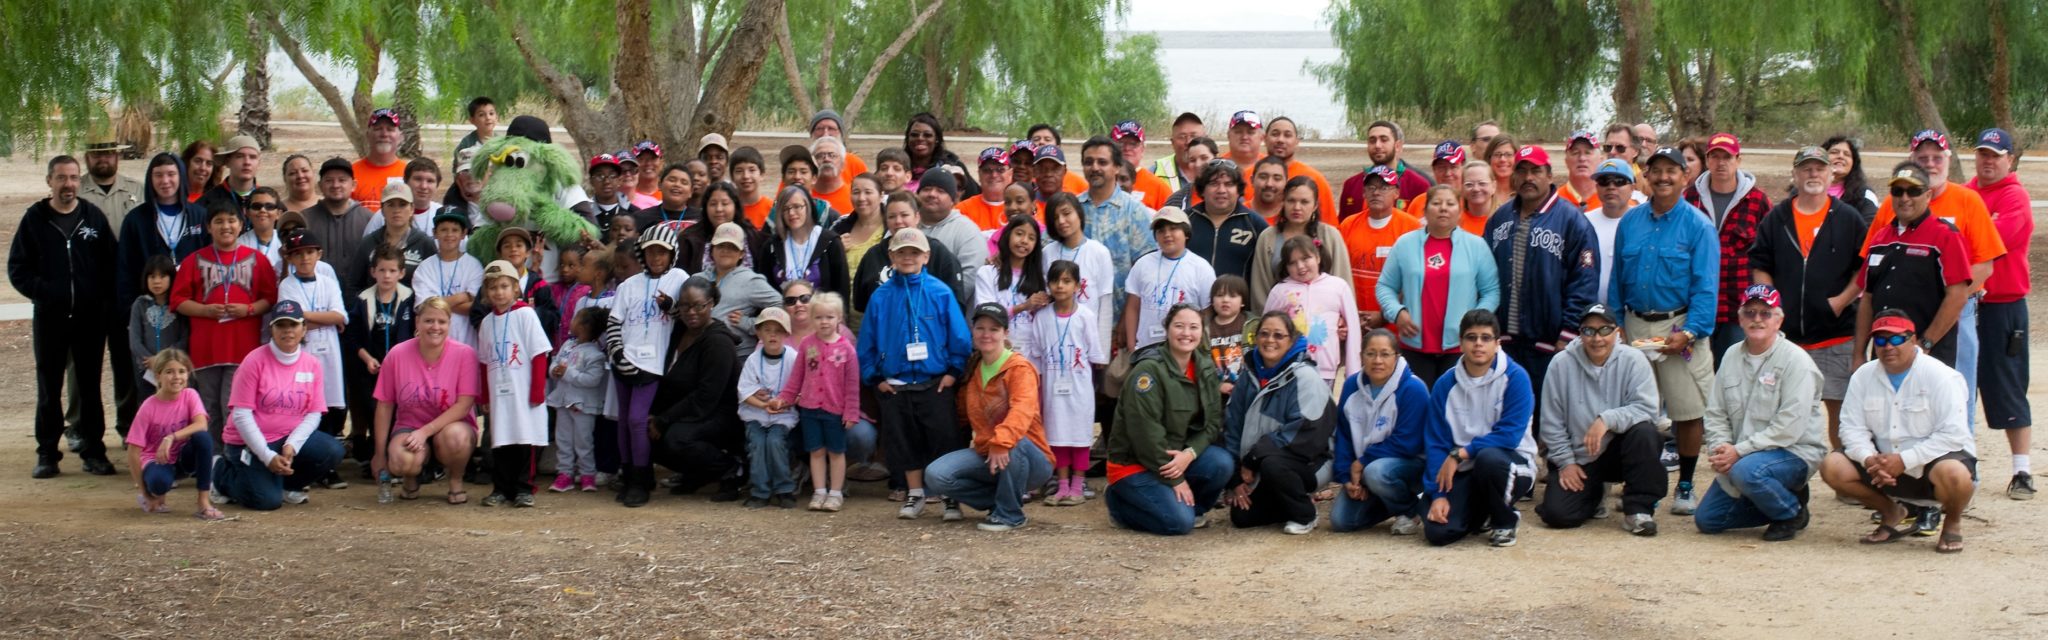 C.A.S.T. for Kids – Lake Perris